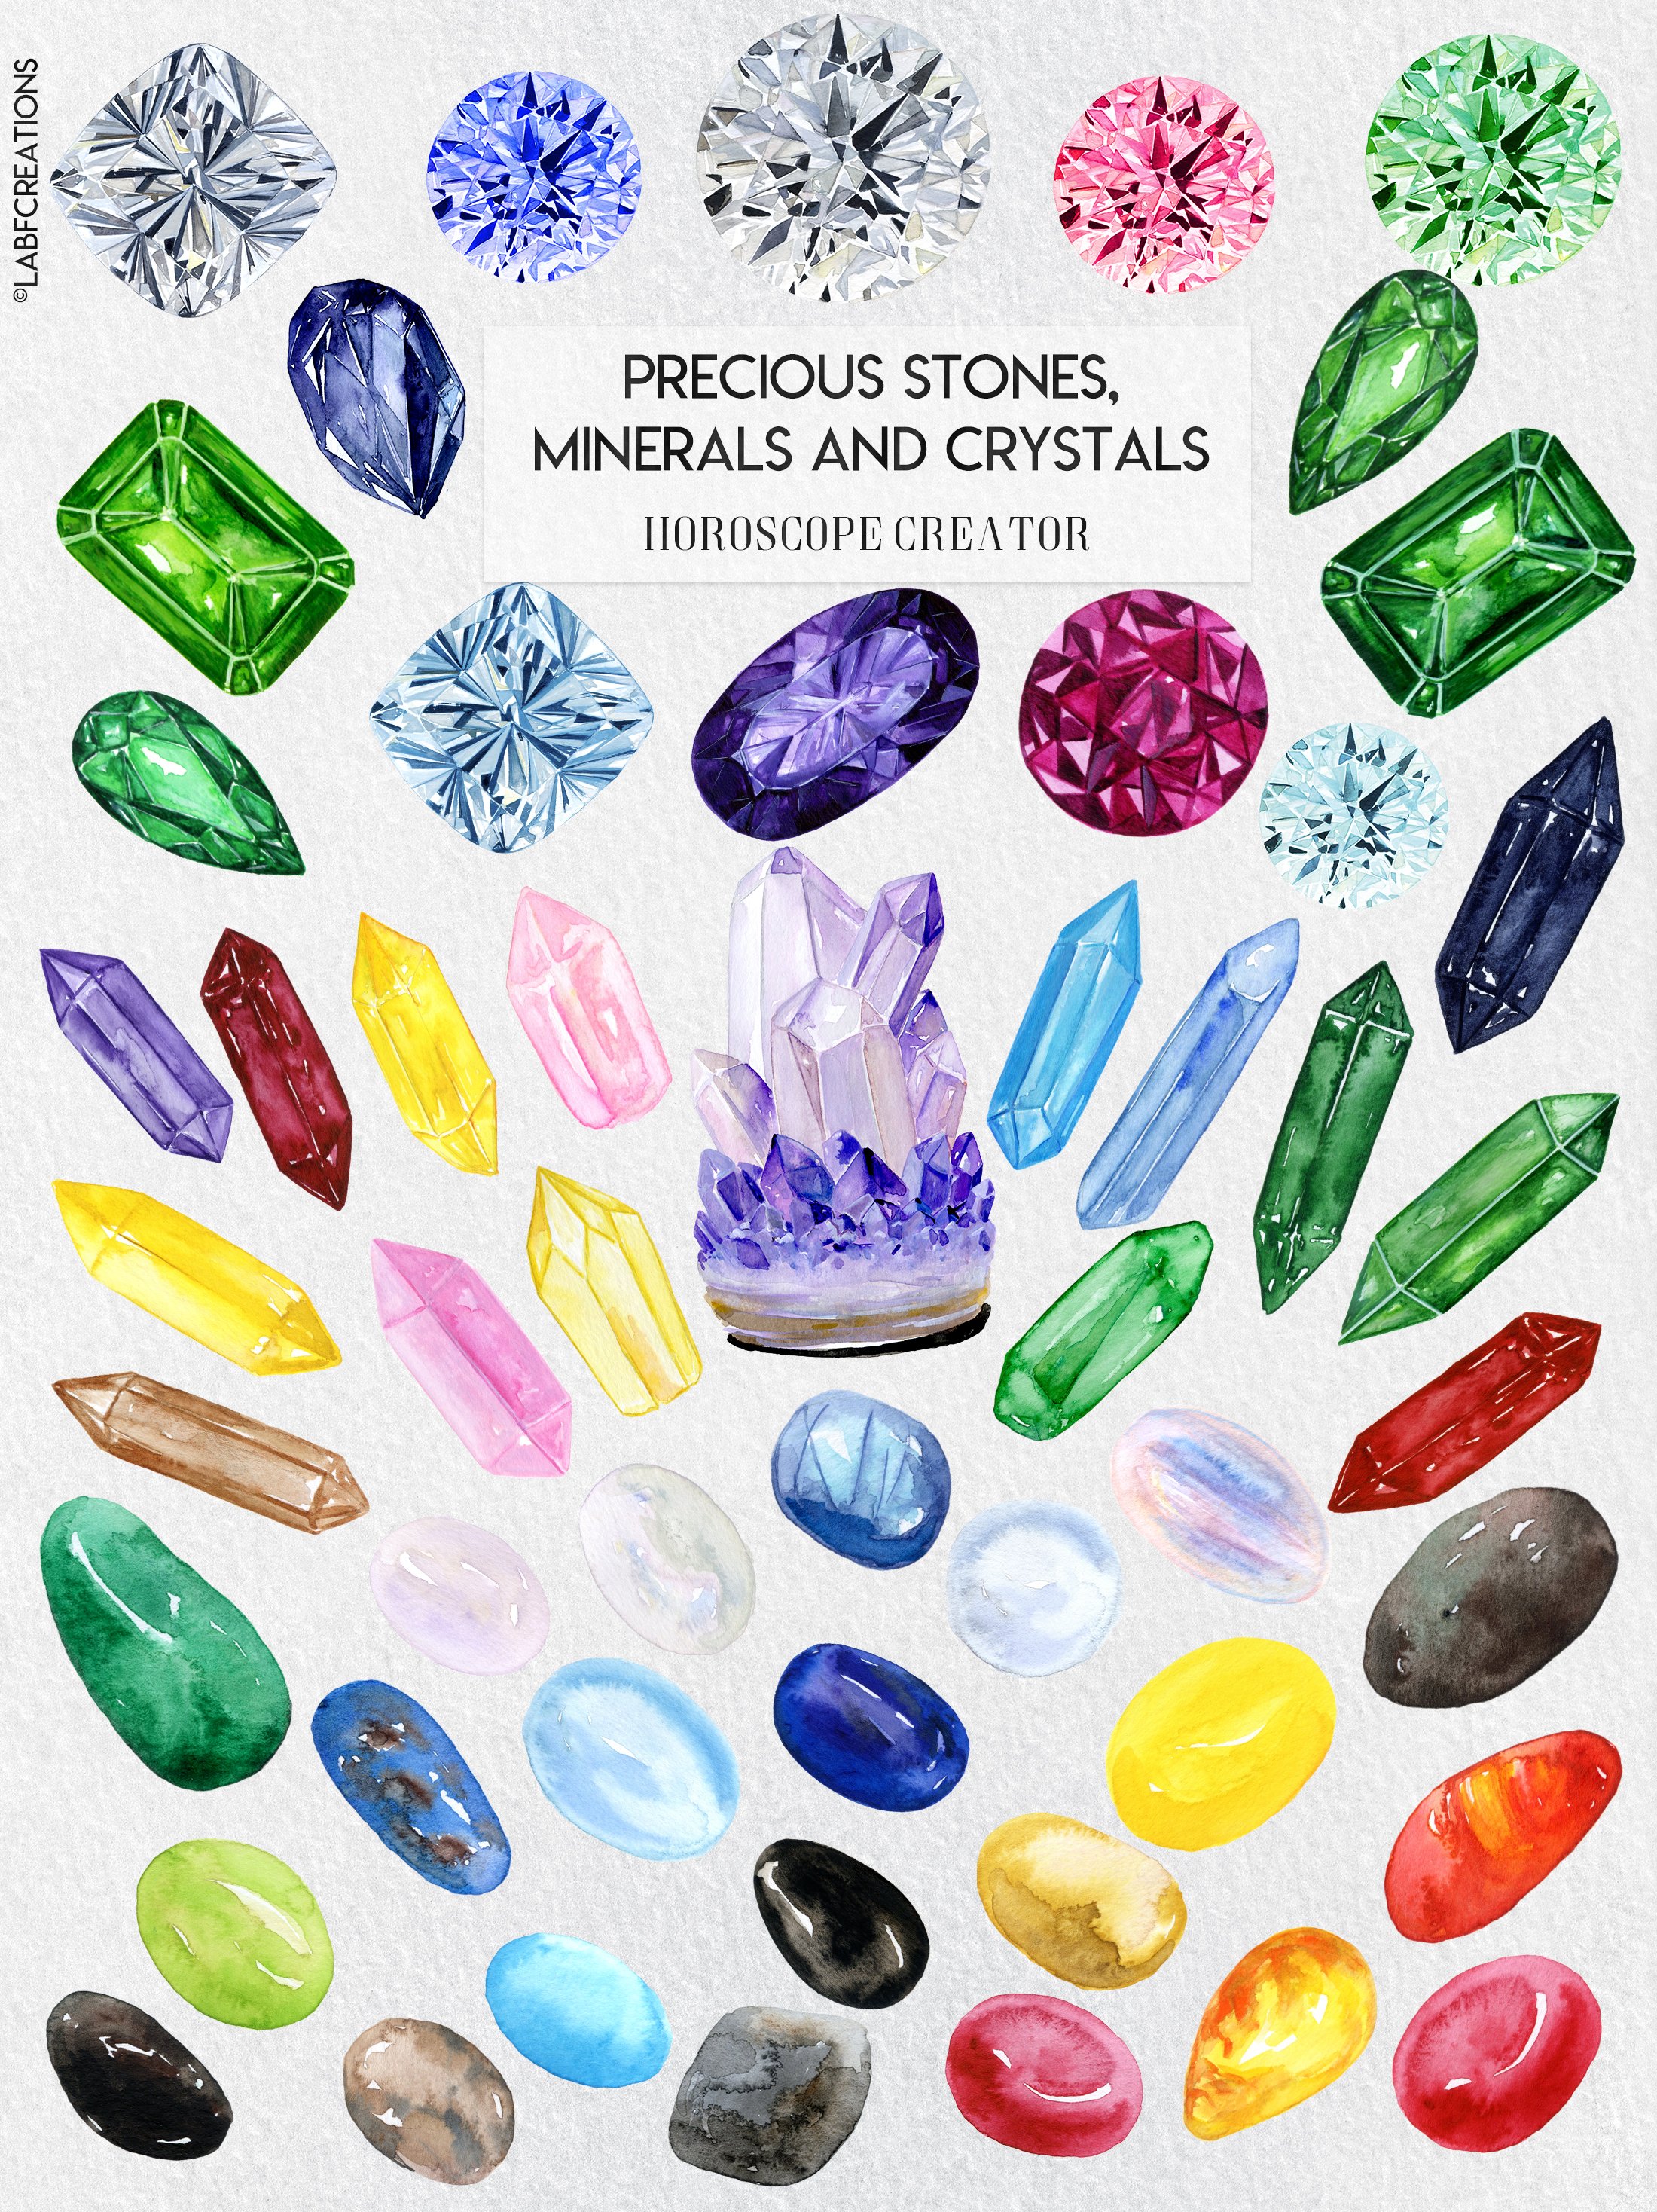 Watercolor Stones, Crystals Minerals cover image.